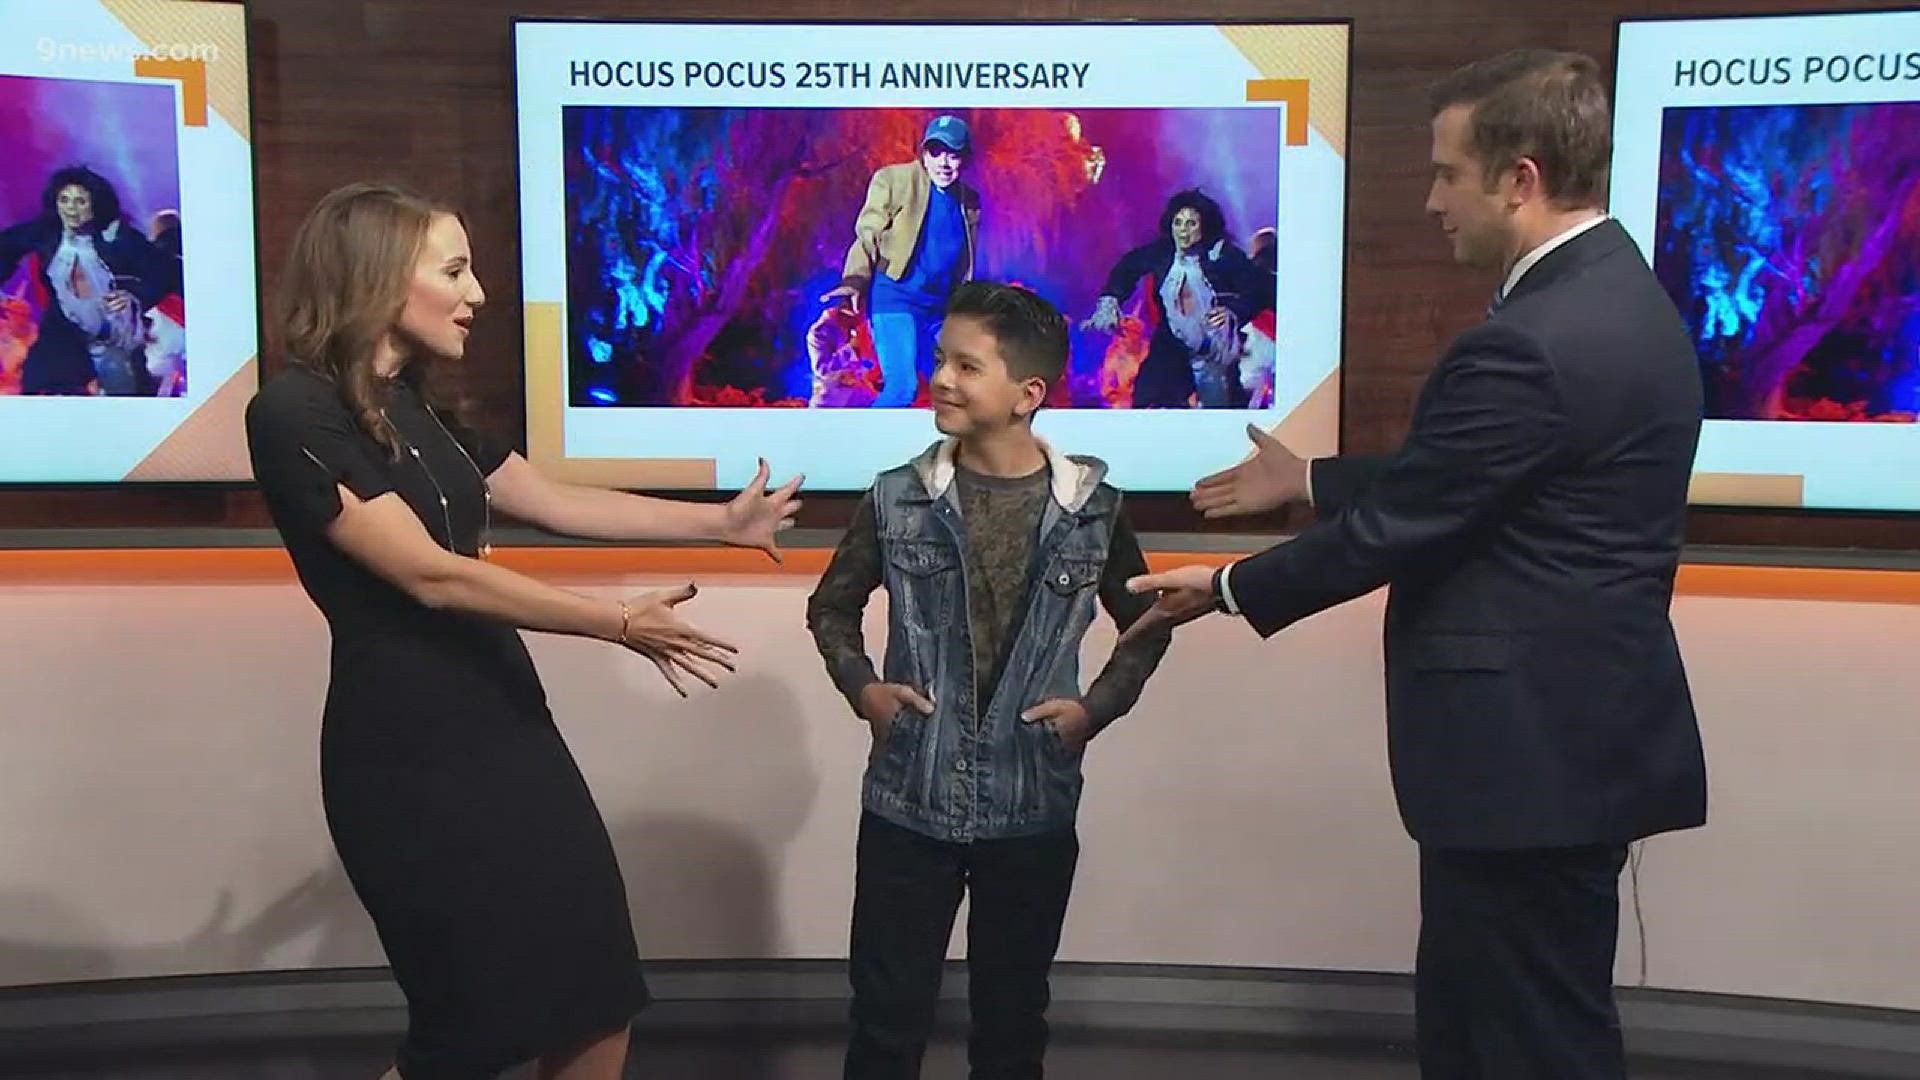 Jonathan Jaramillo from Aurora just returned from a huge TV special - Freeform TV's 25th anniversary Hocus Pocus special, to be exact - that aired on Saturday.